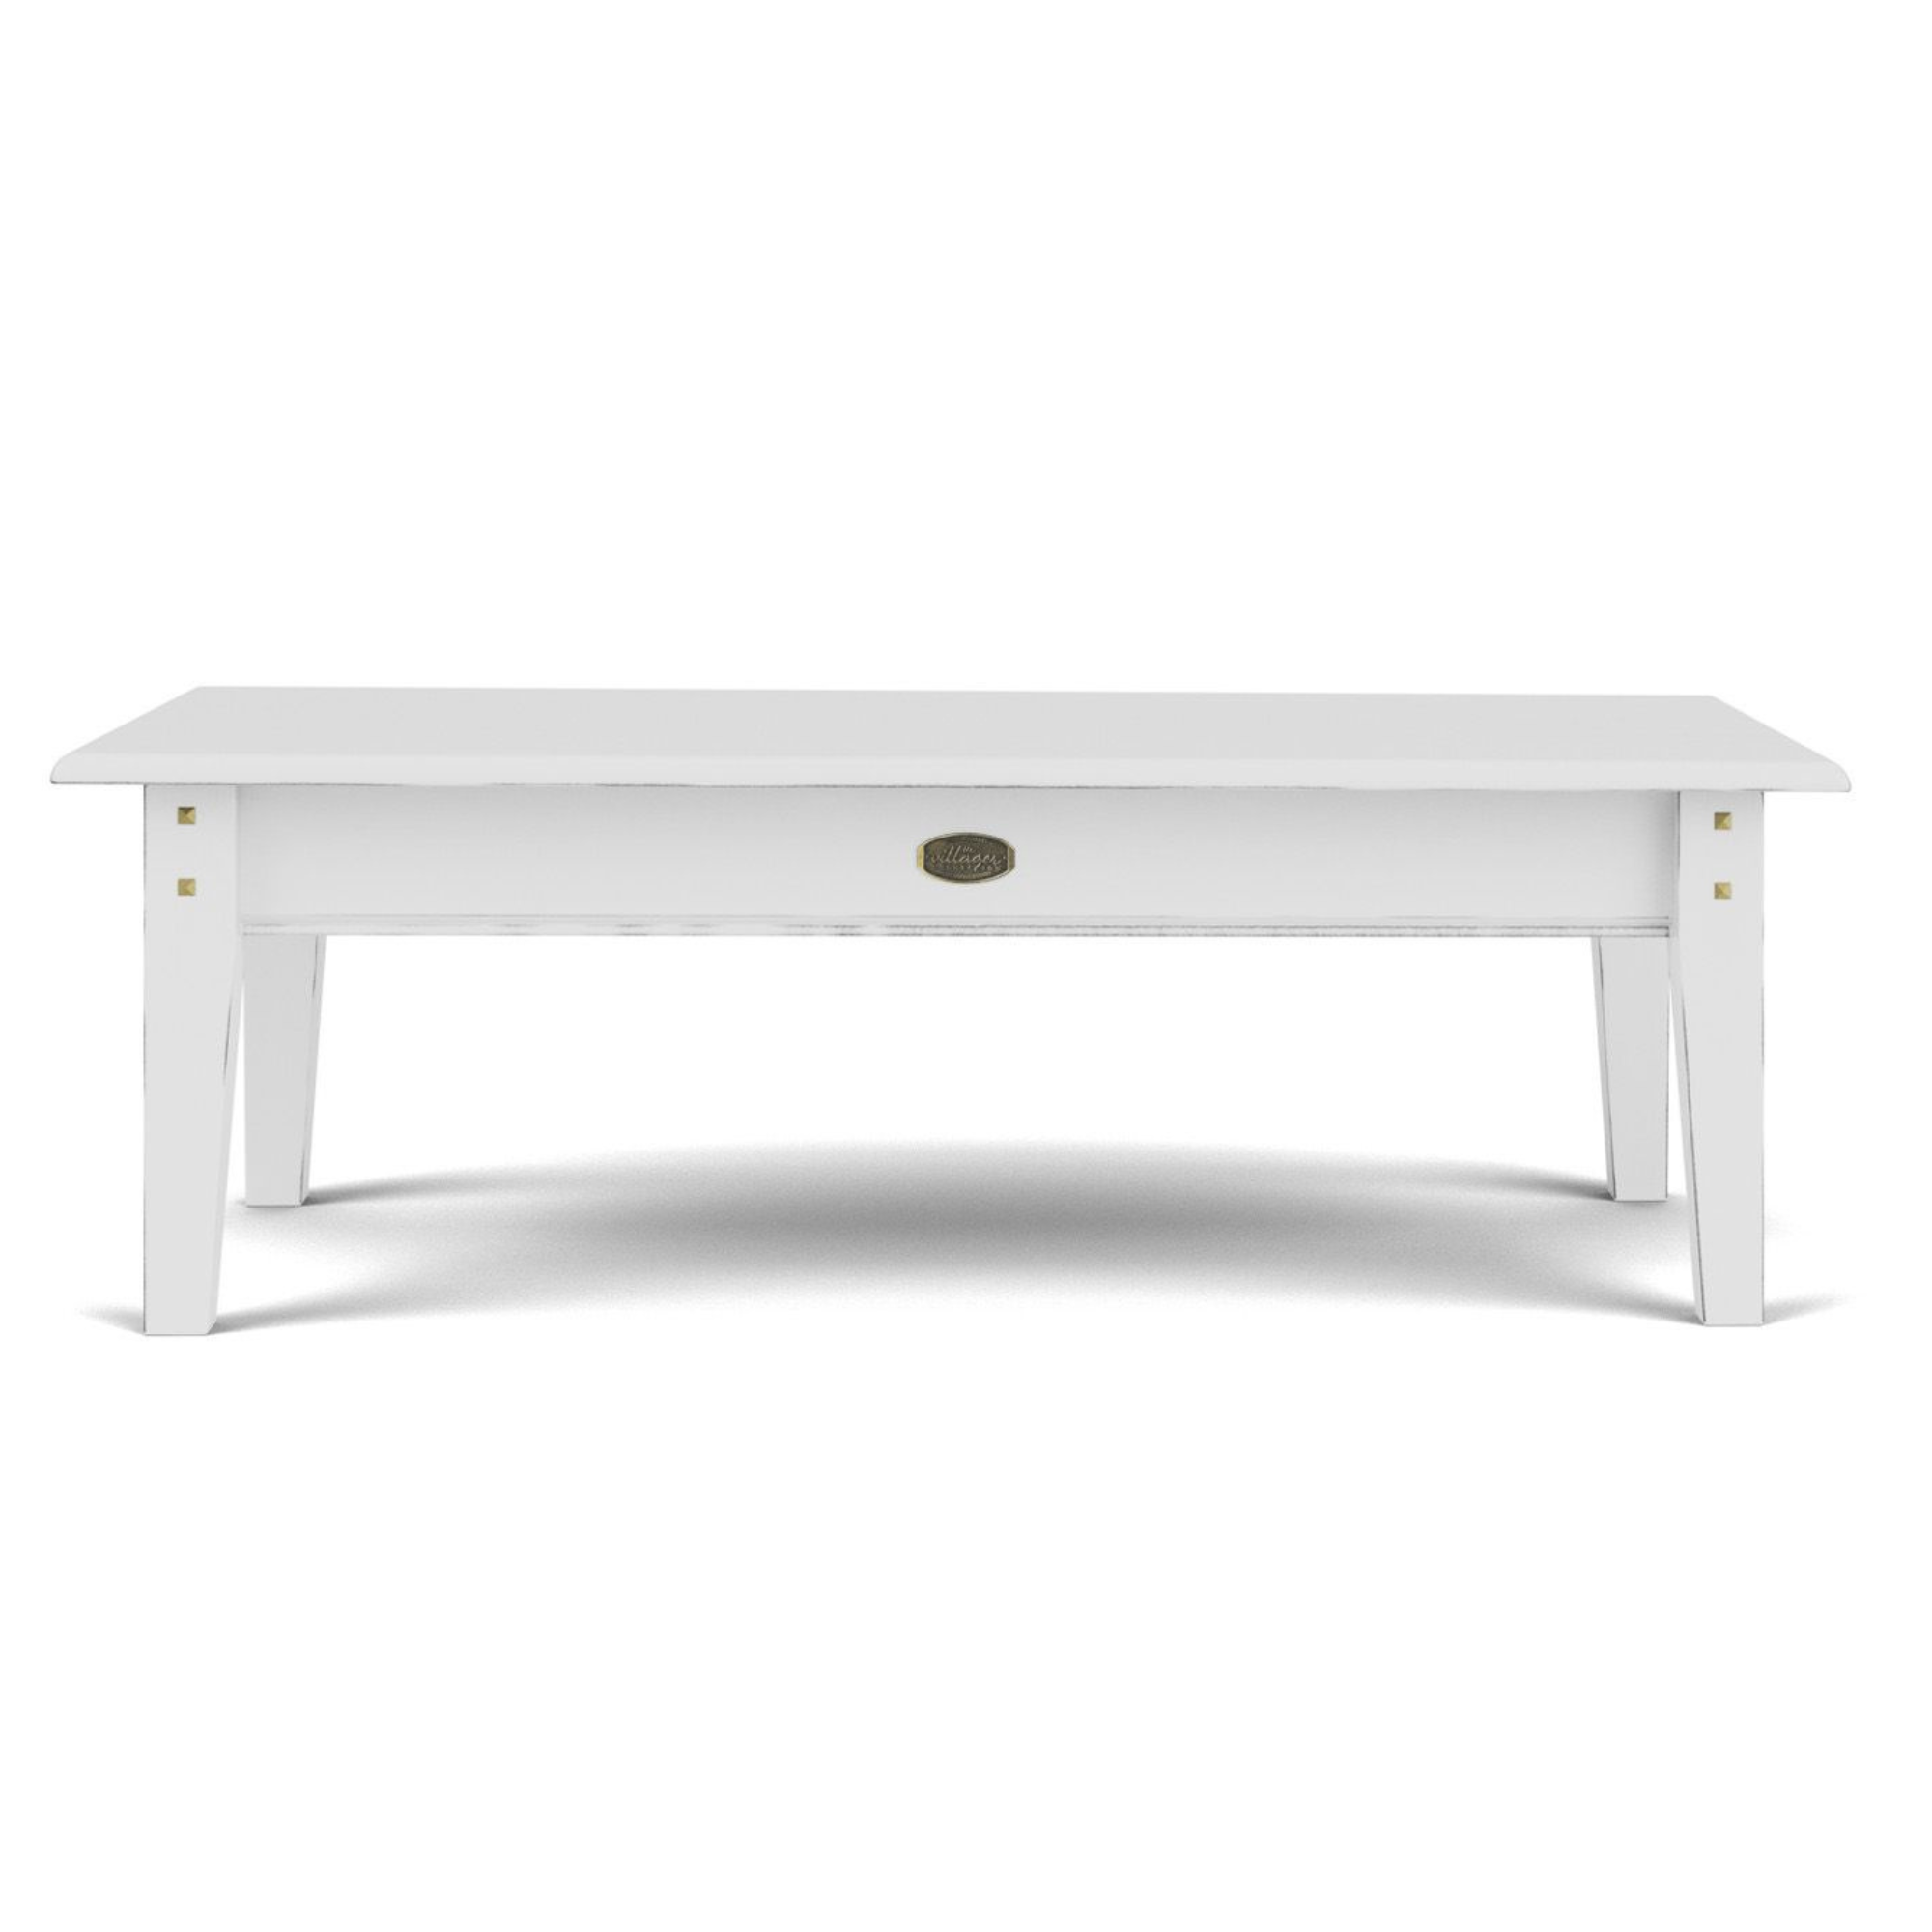 VILLAGER COFFEE TABLE | WITH OR WITHOUT DRAWER | NZ MADE